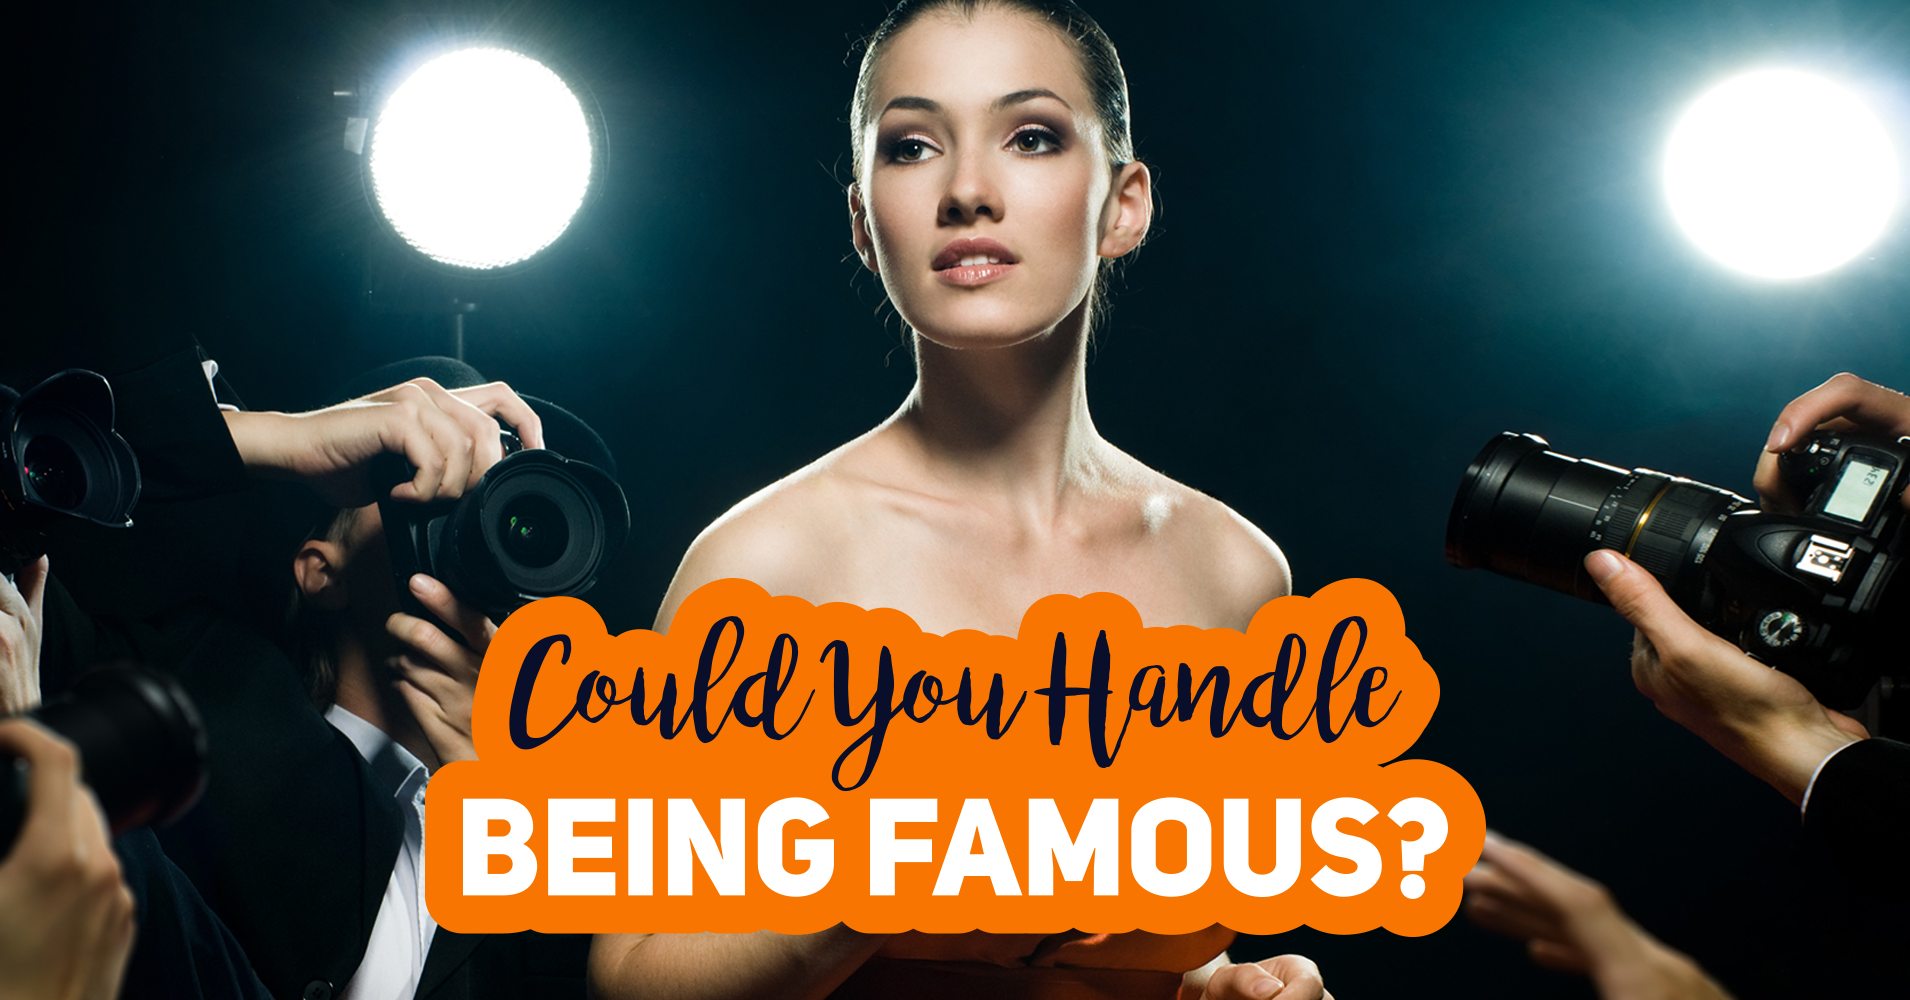 Could You Handle Being Famous? Question 14 - Do you regularly post on